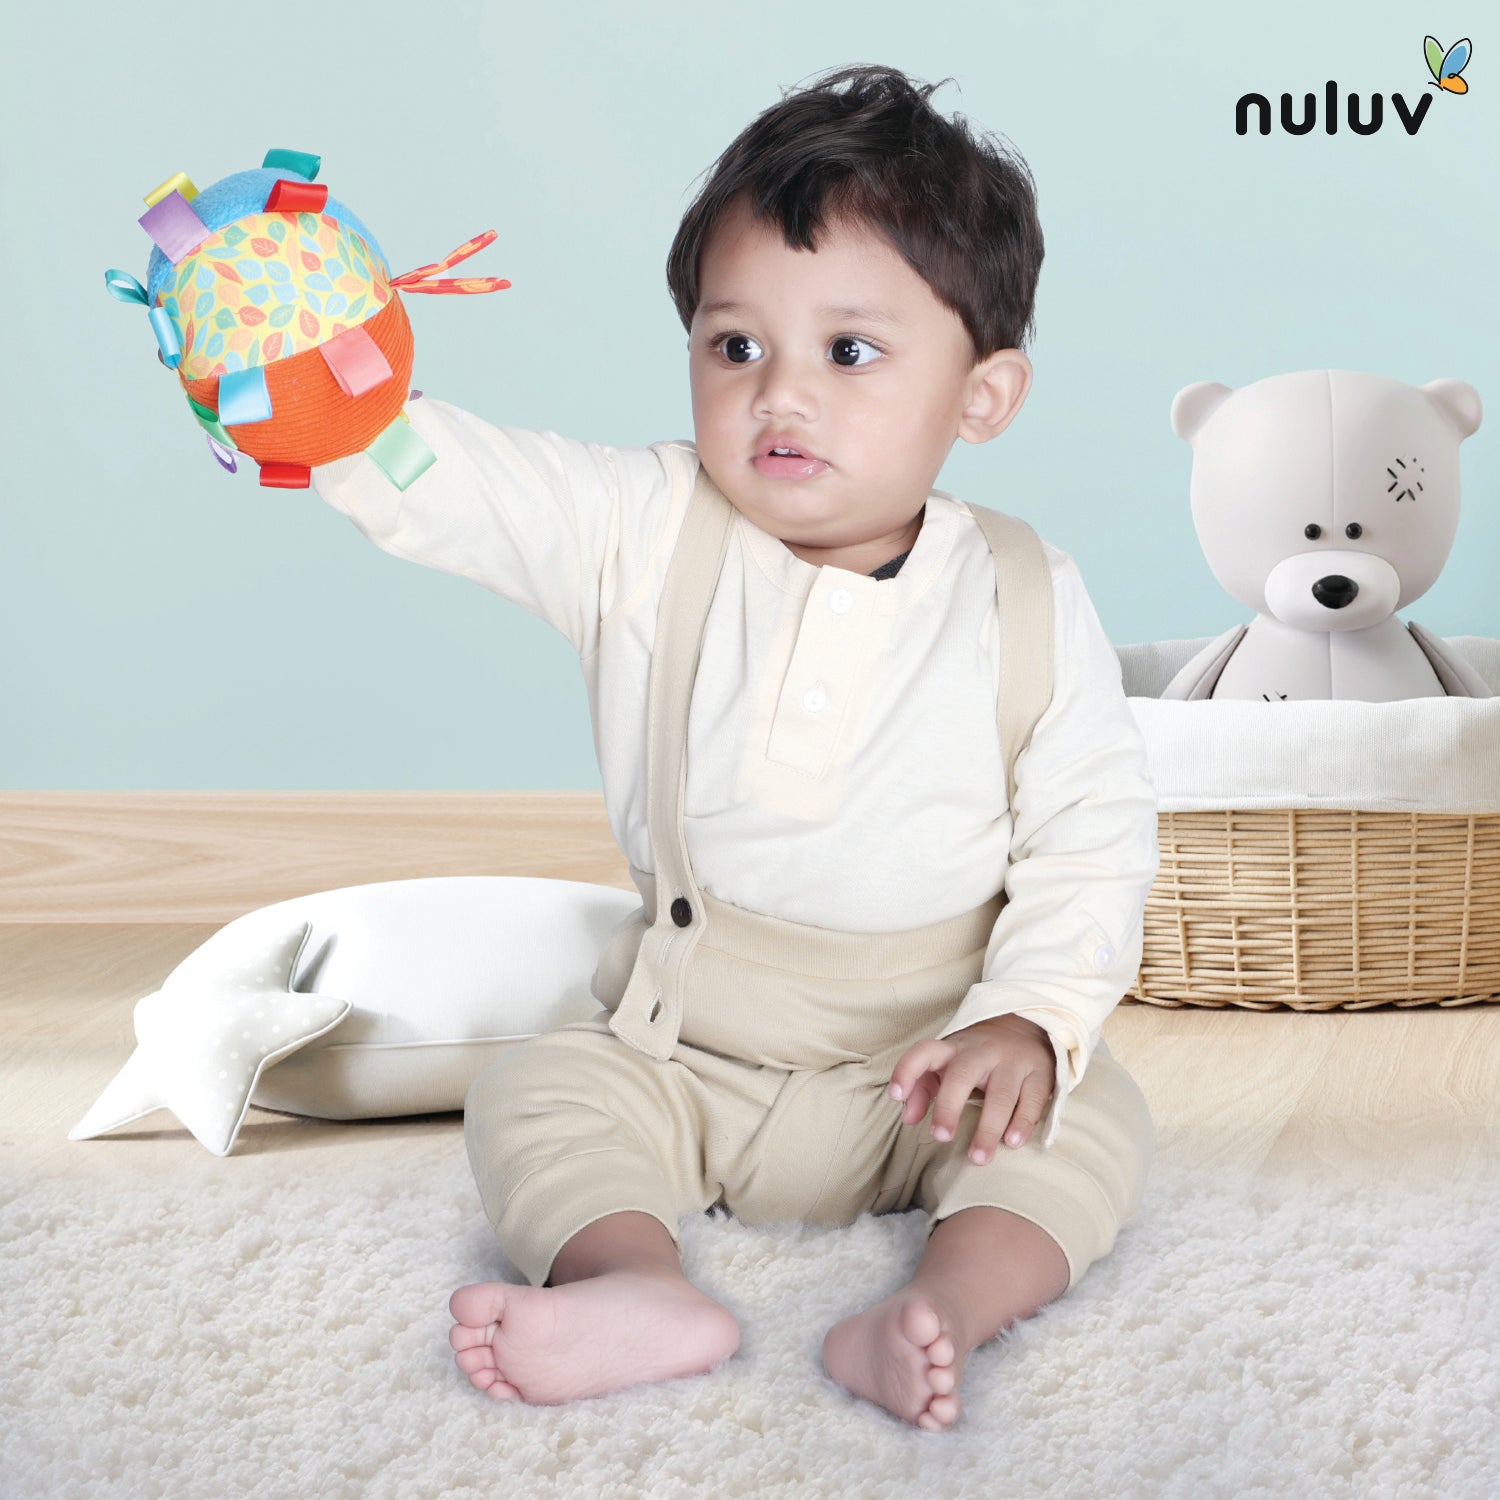 Nuluv Activity Ball - 1 Soft Plush Baby Ball, Multicolor